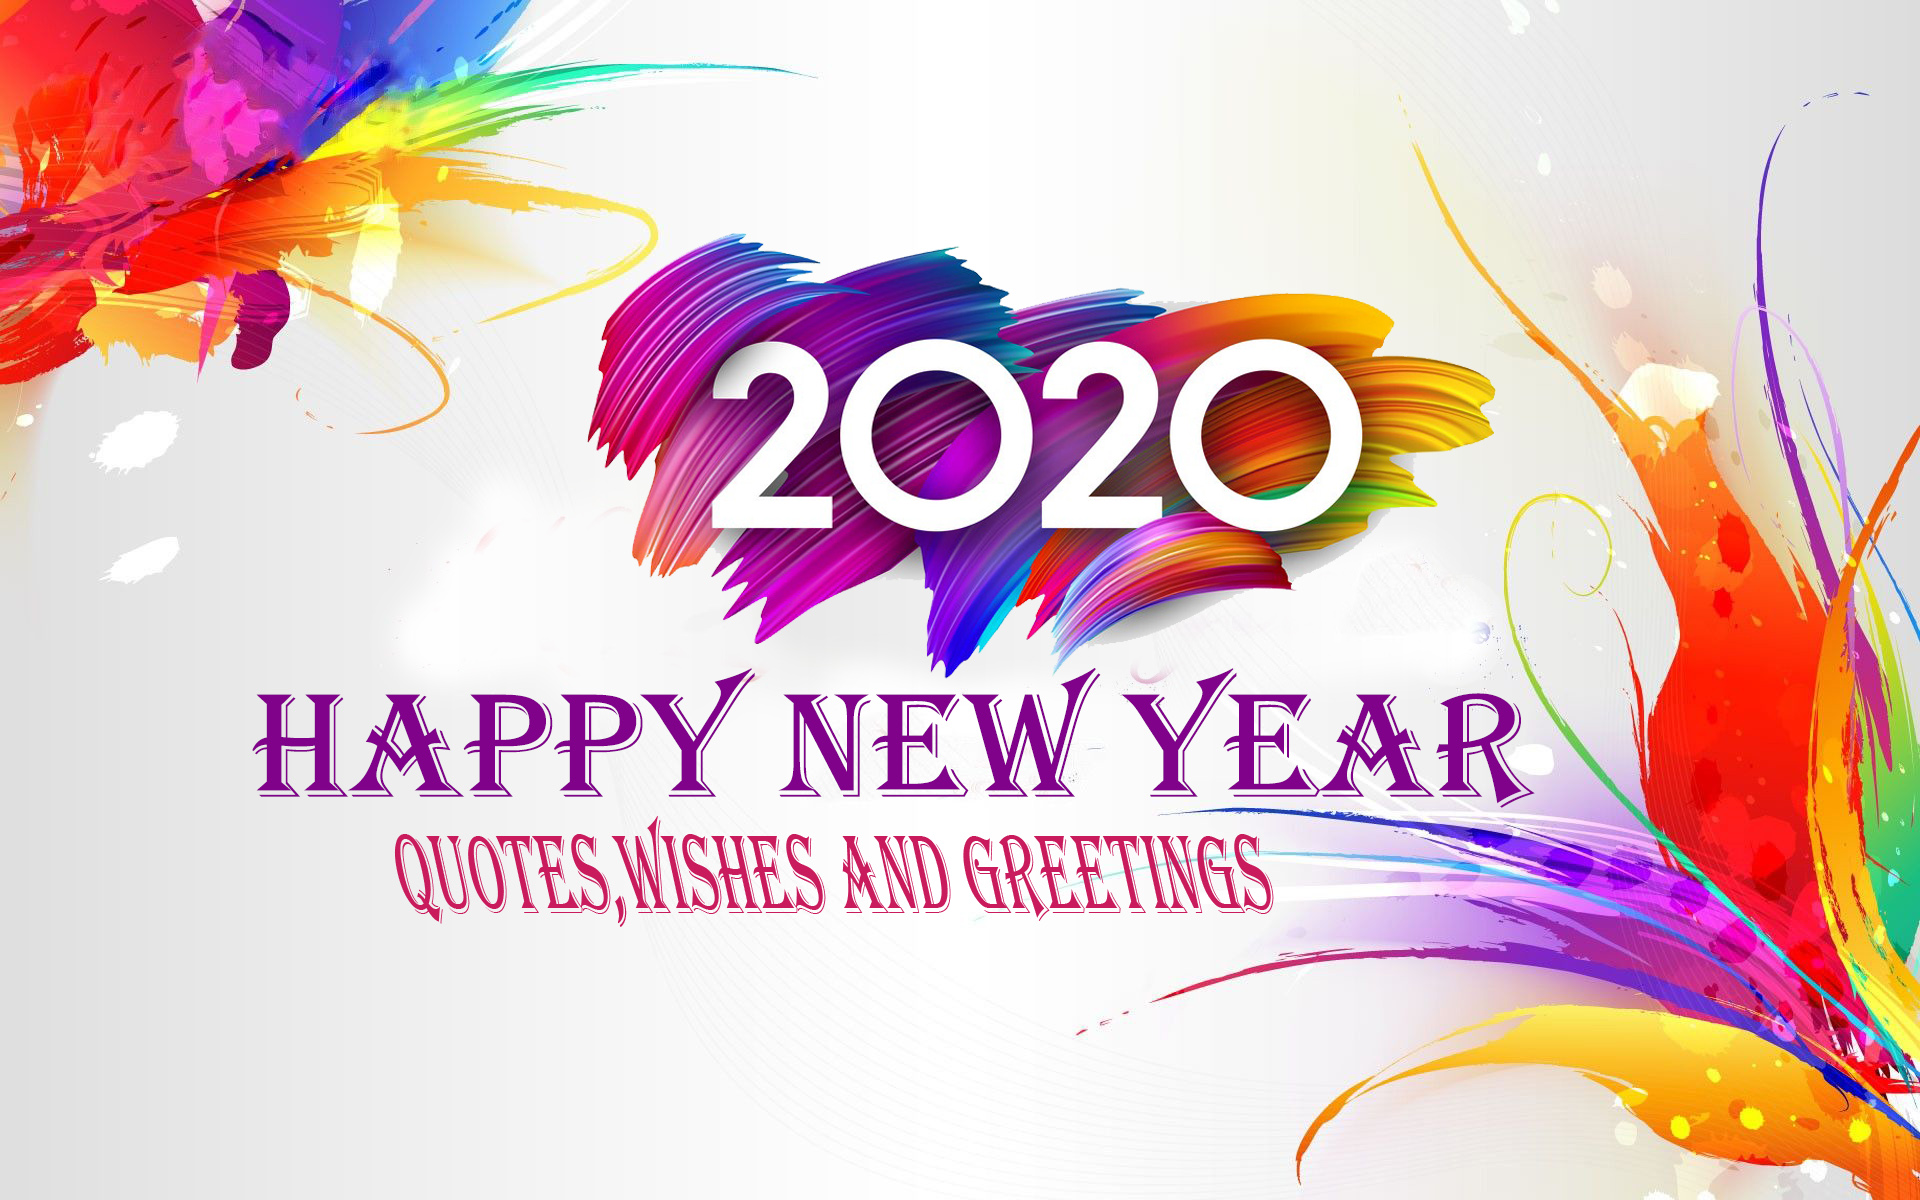 Happy New Year Quotes Image Wishes And Greetings Wish Event